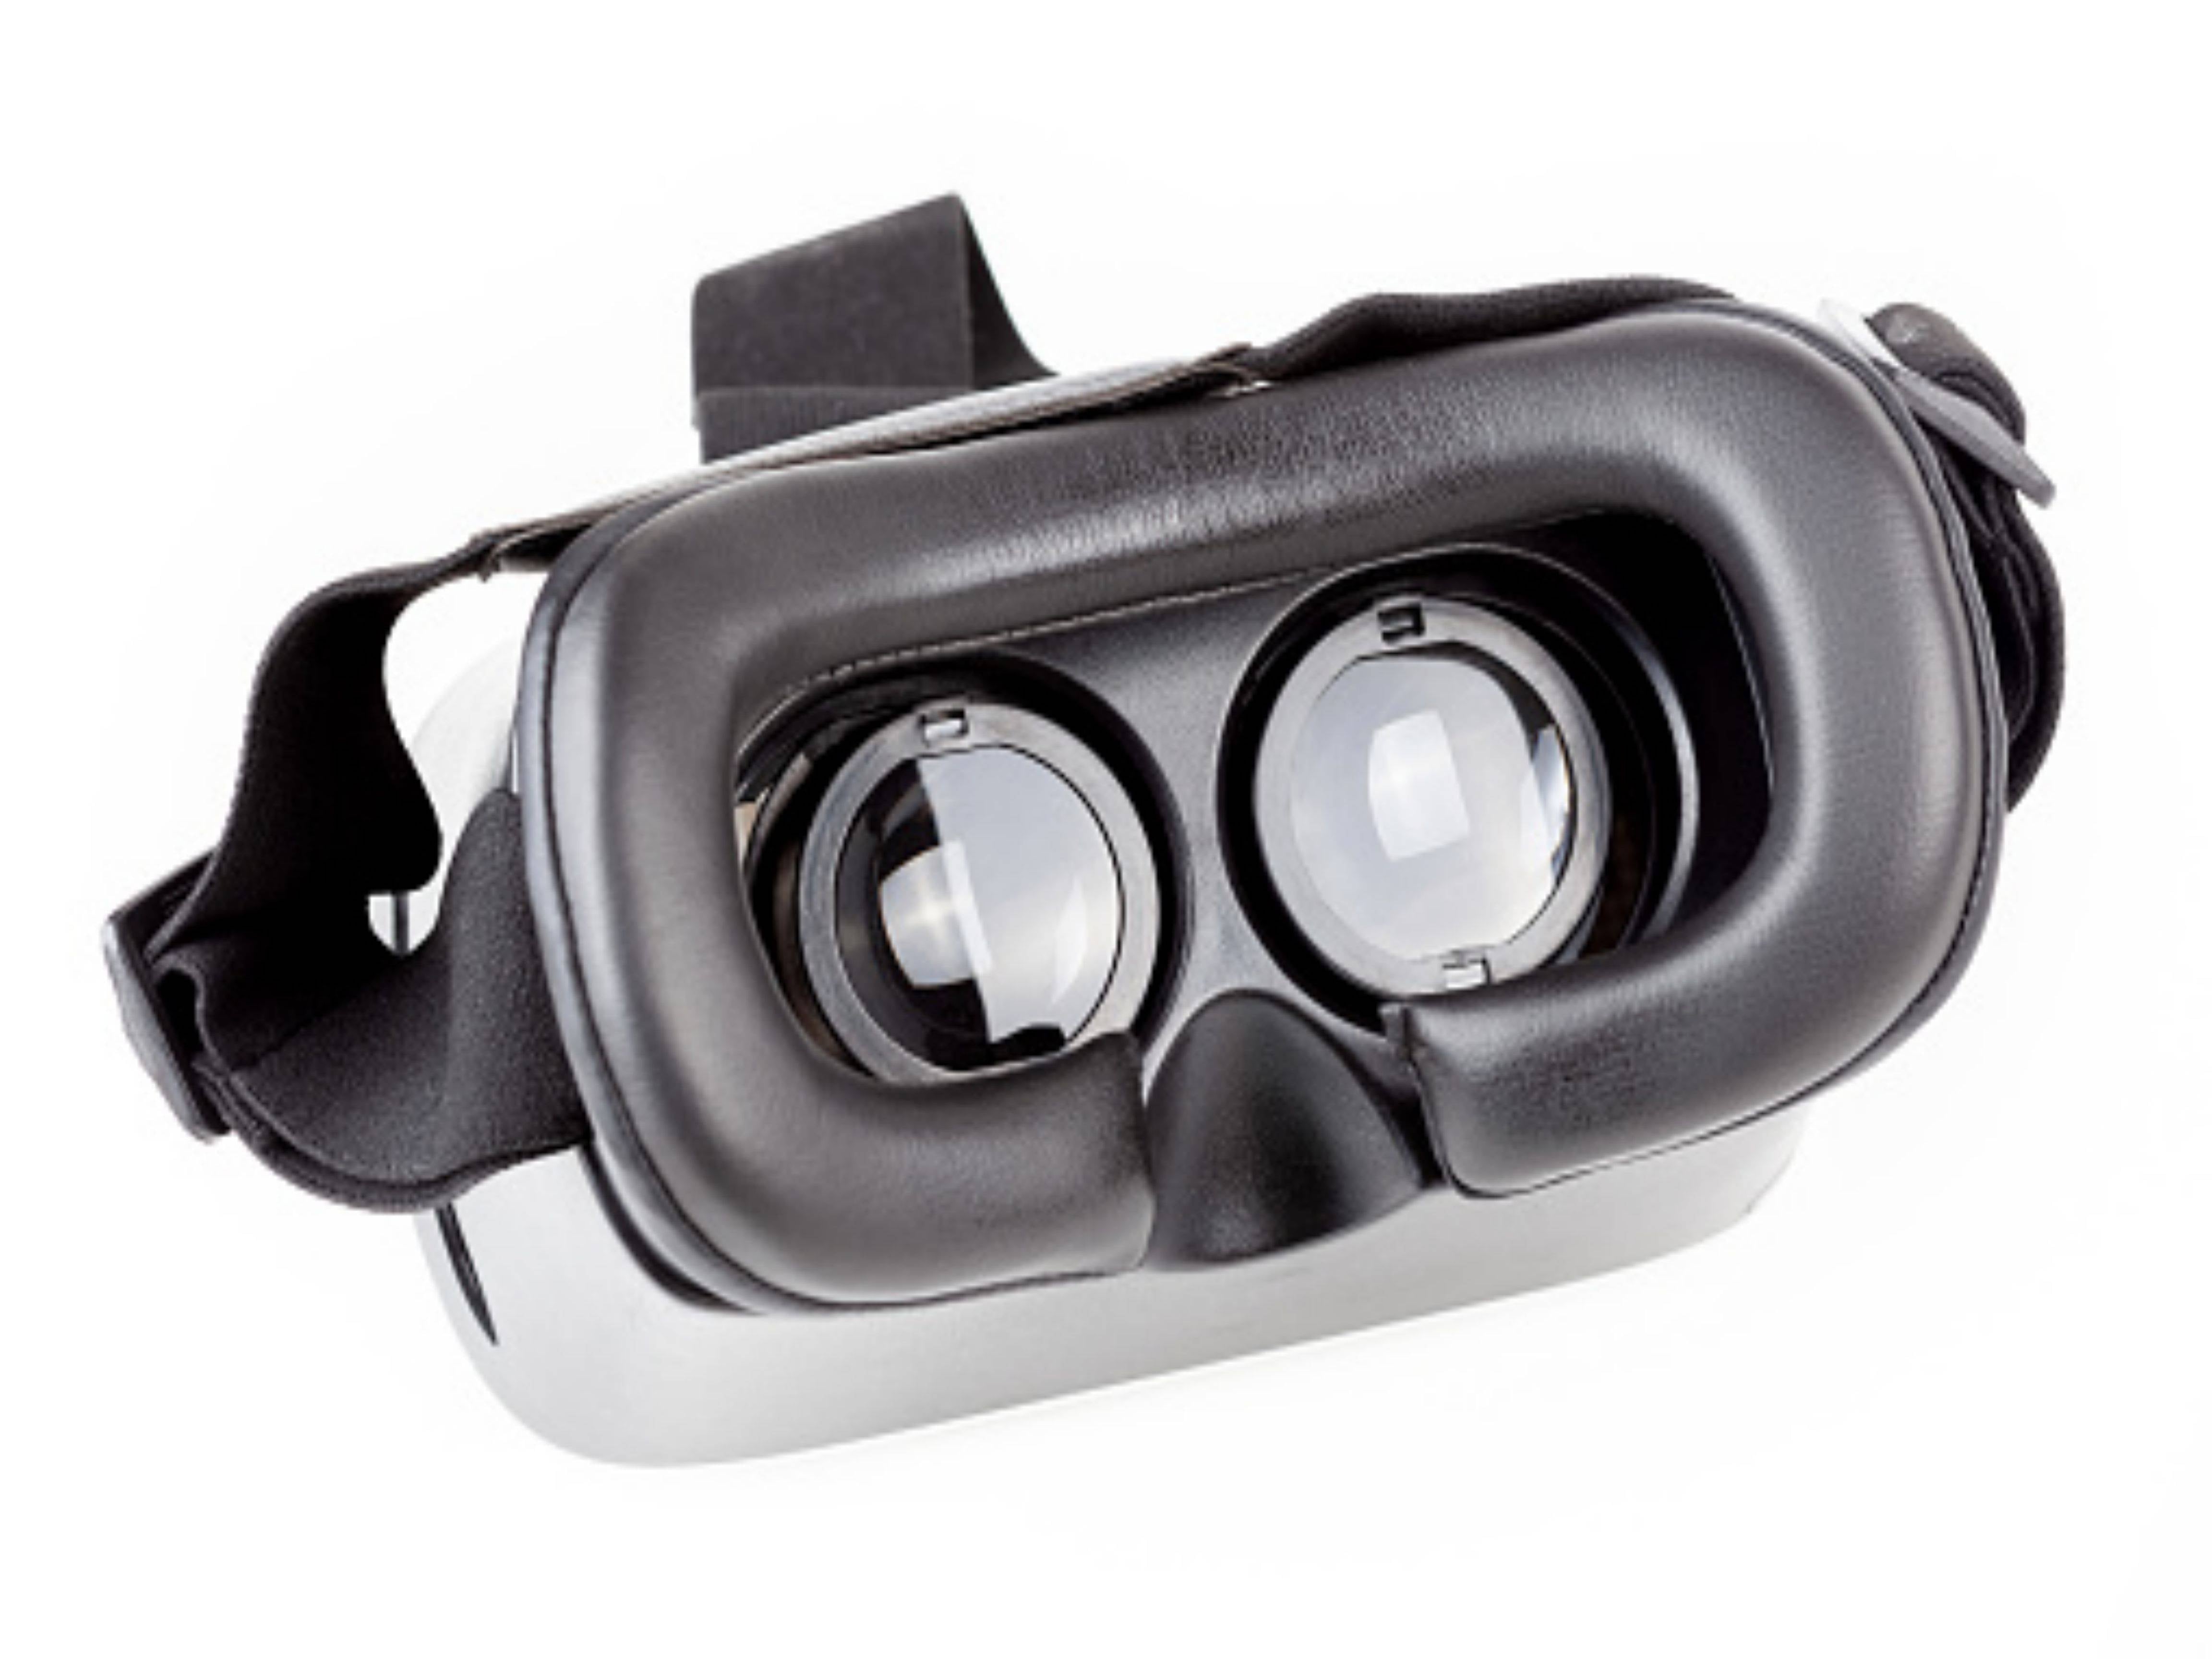 Why is the core technology of VR headsets said to be optical lenses?